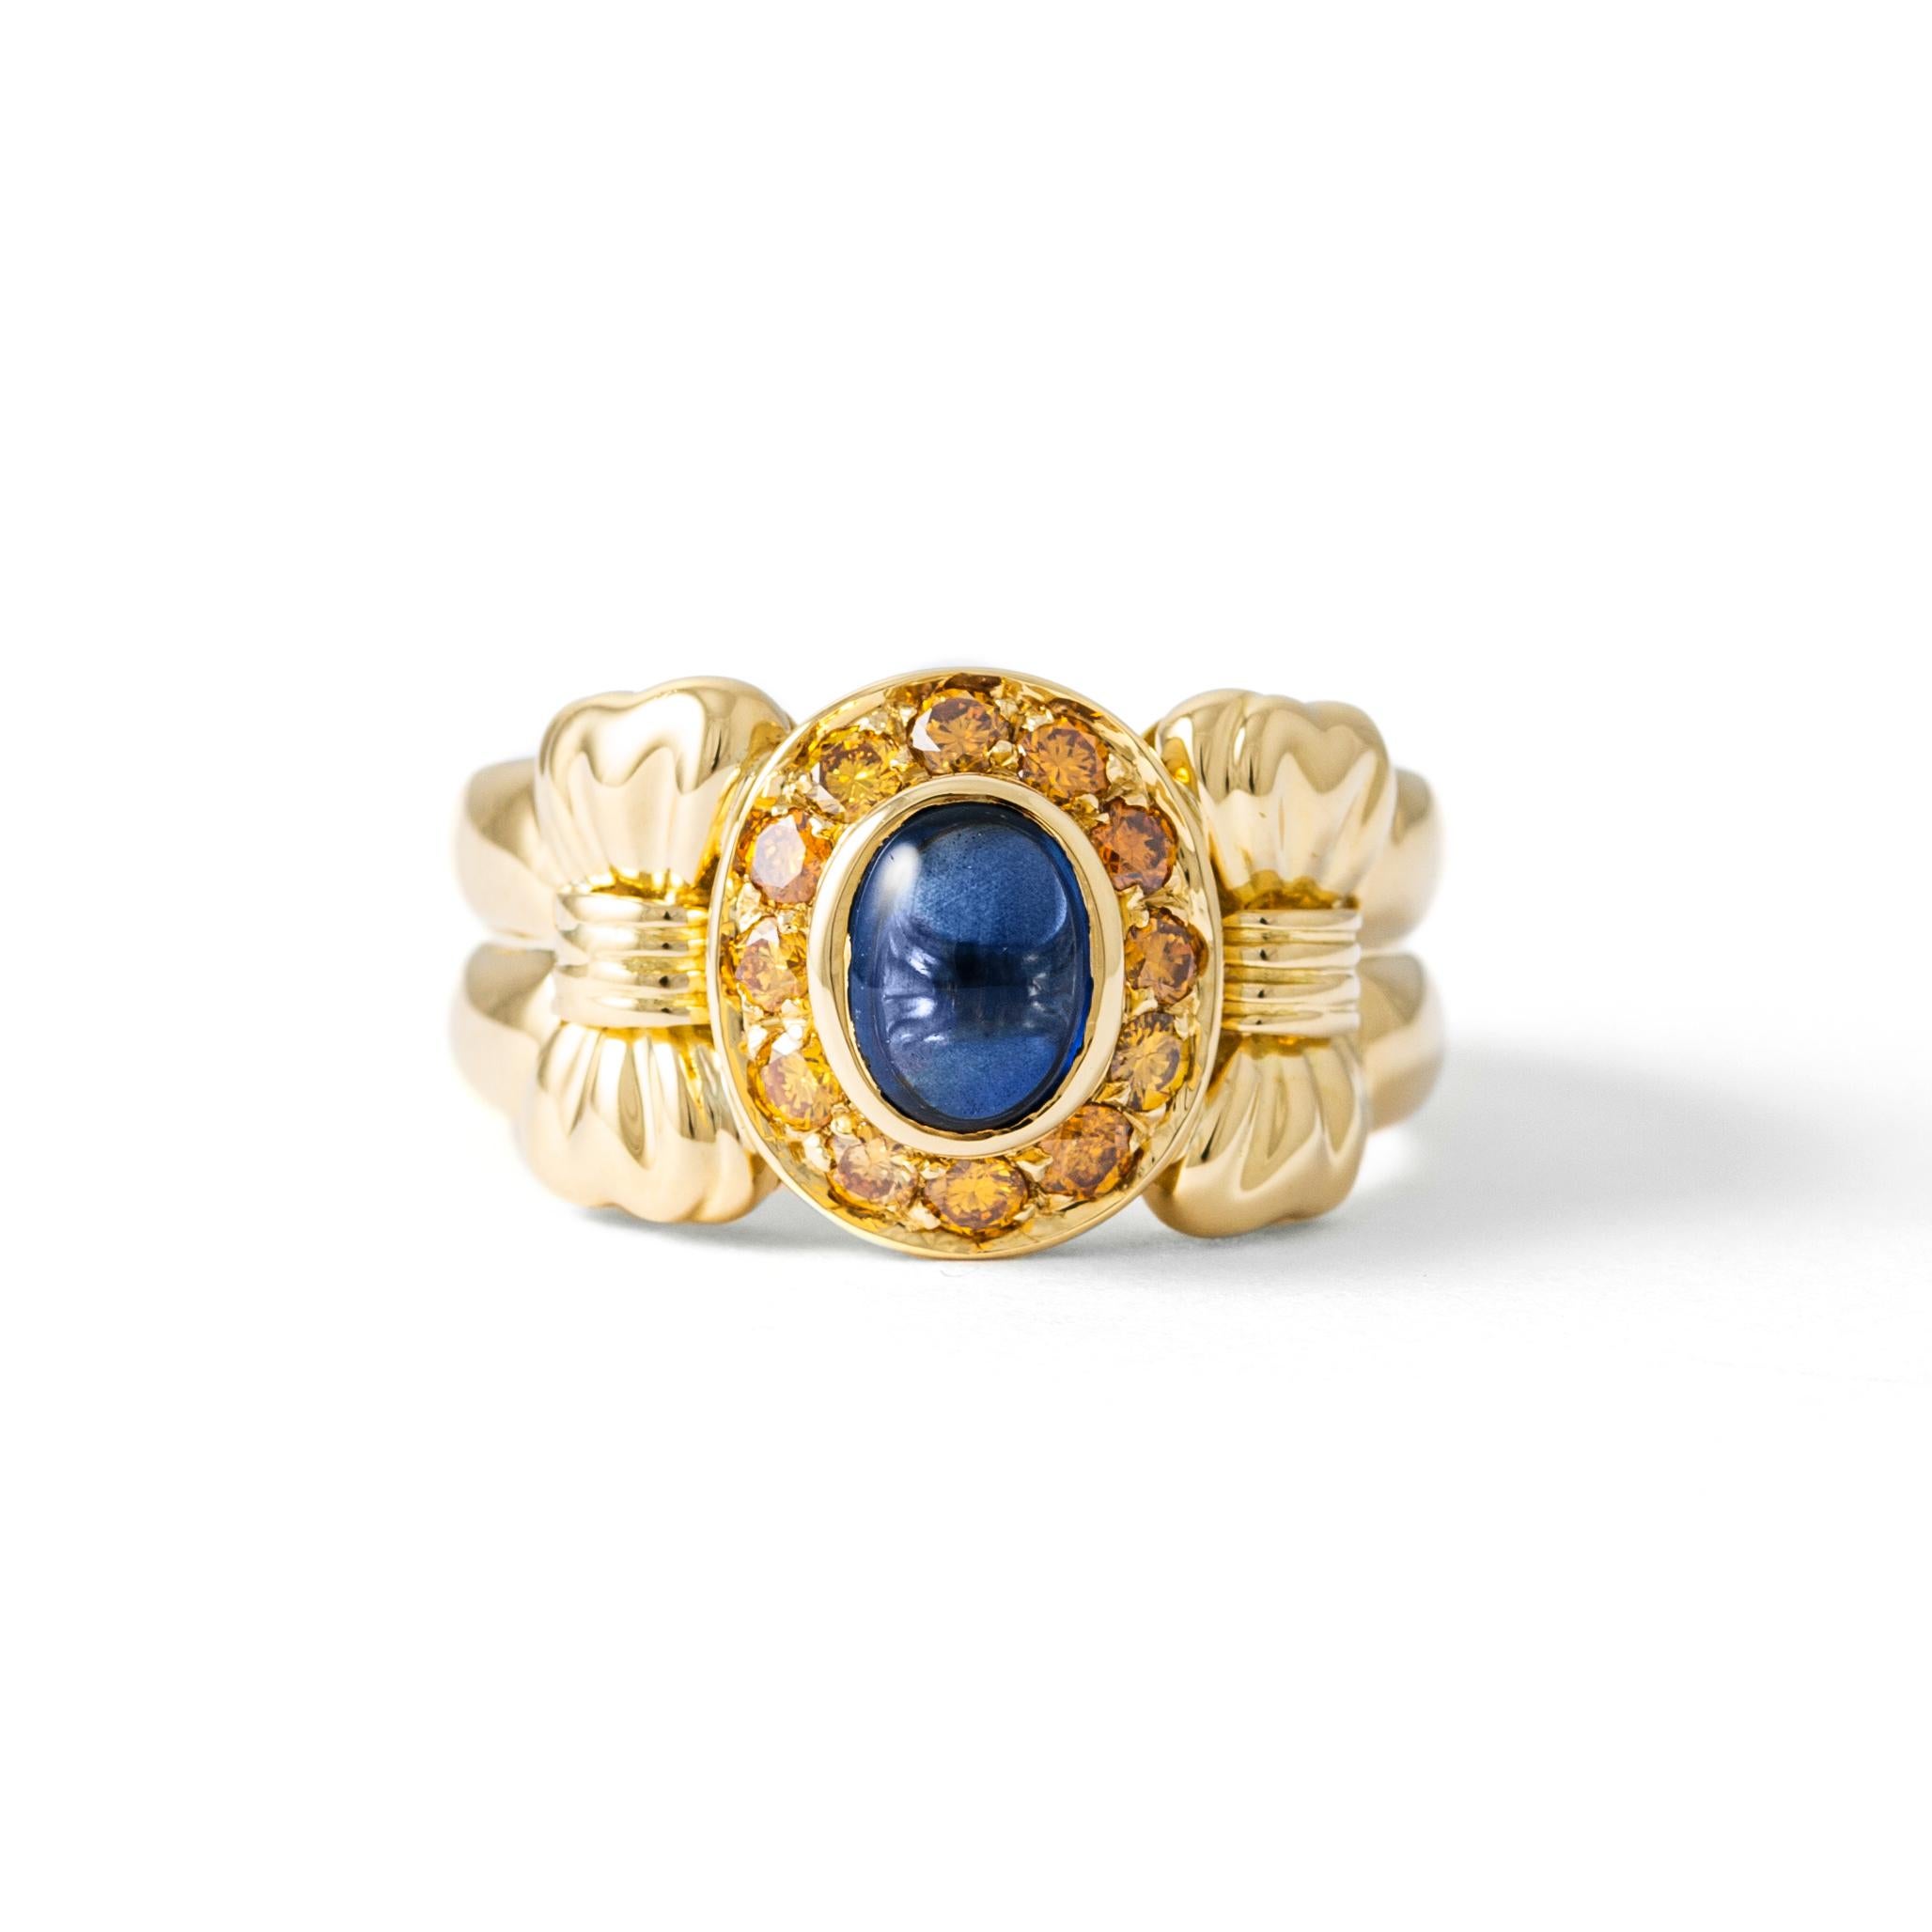 Ring in 18kt yellow gold set with one cabochon cut sapphire 1.32 cts and 12diamonds 0.44 cts Size 53